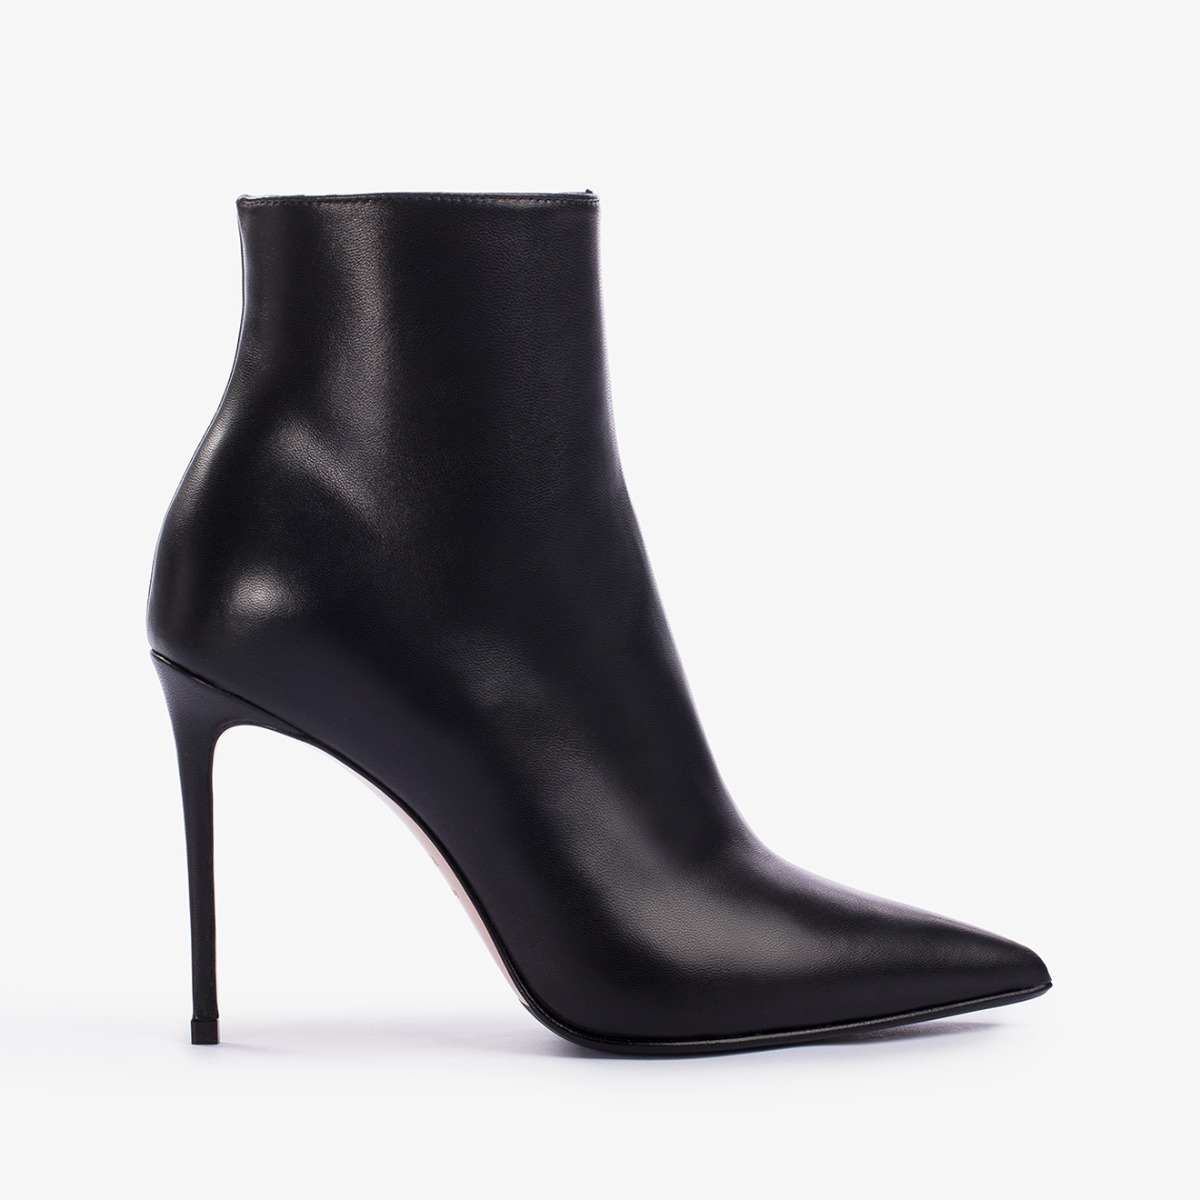 EVA ANKLE BOOT 100 mm - Le Silla | Official Online Store